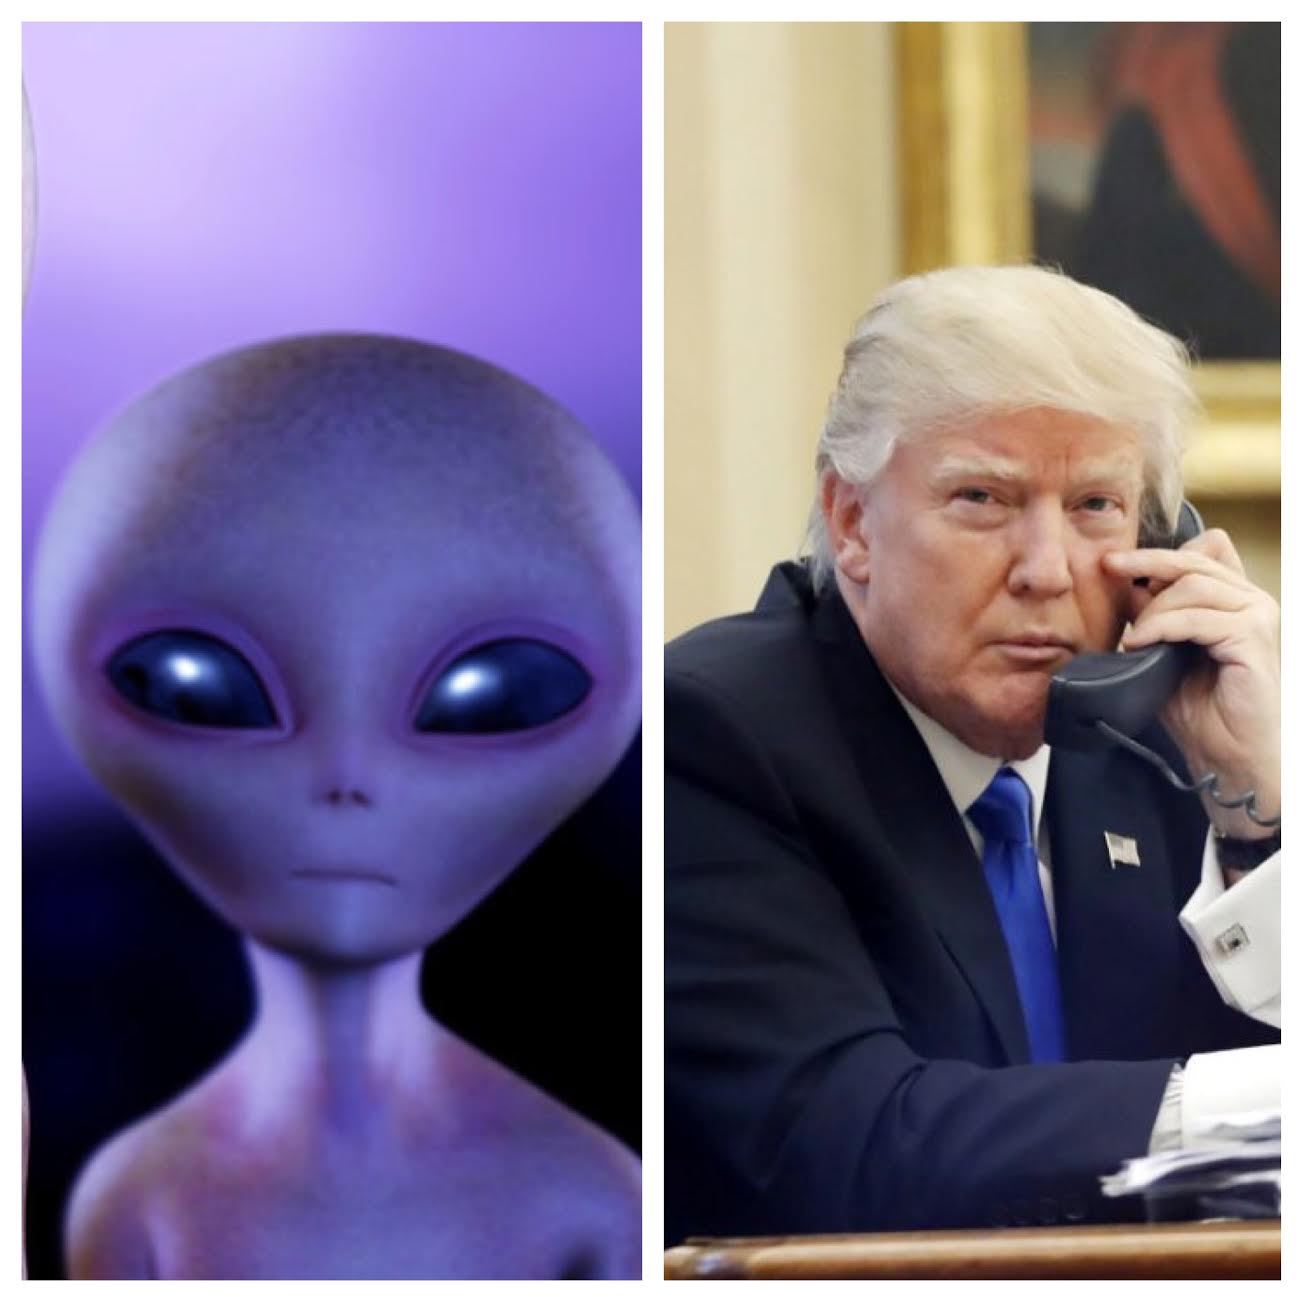 Immigration Hotline Flooded With Prank Calls About Space Aliens